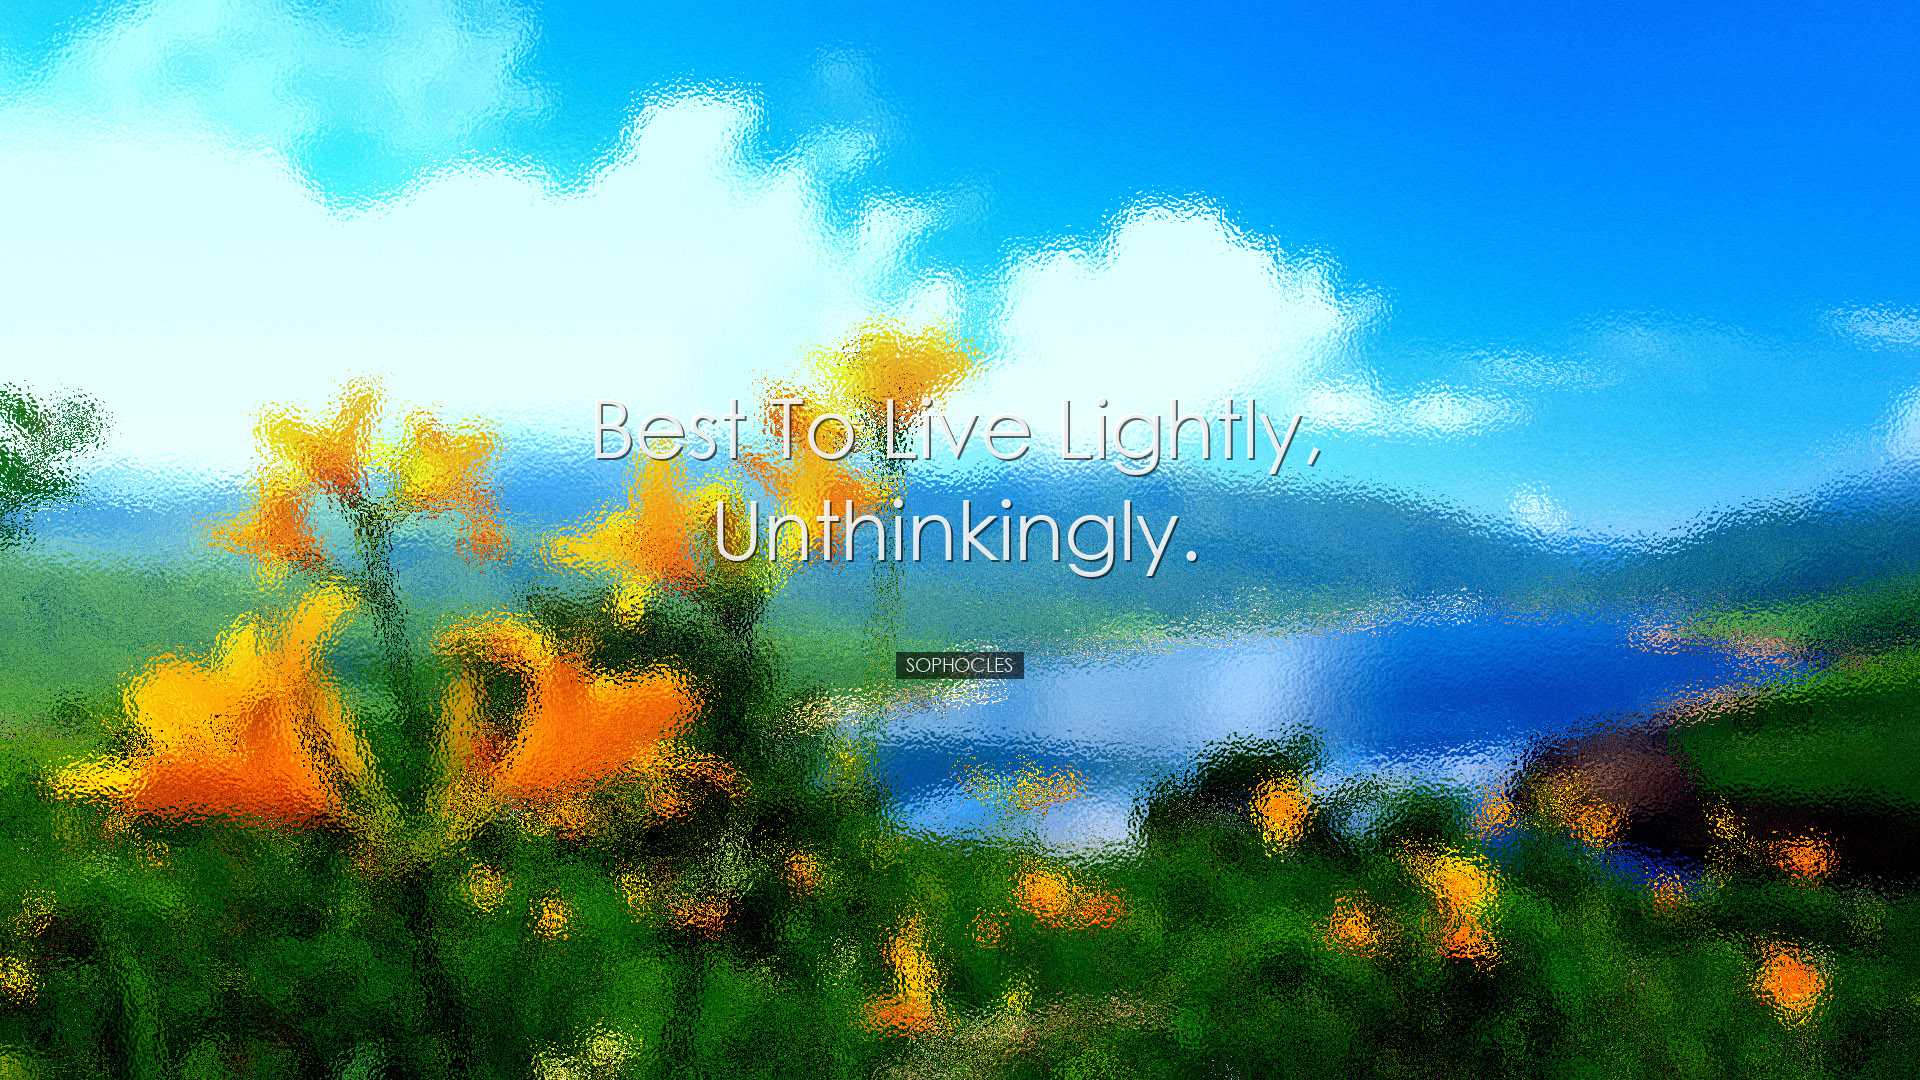 Best to live lightly, unthinkingly. - Sophocles